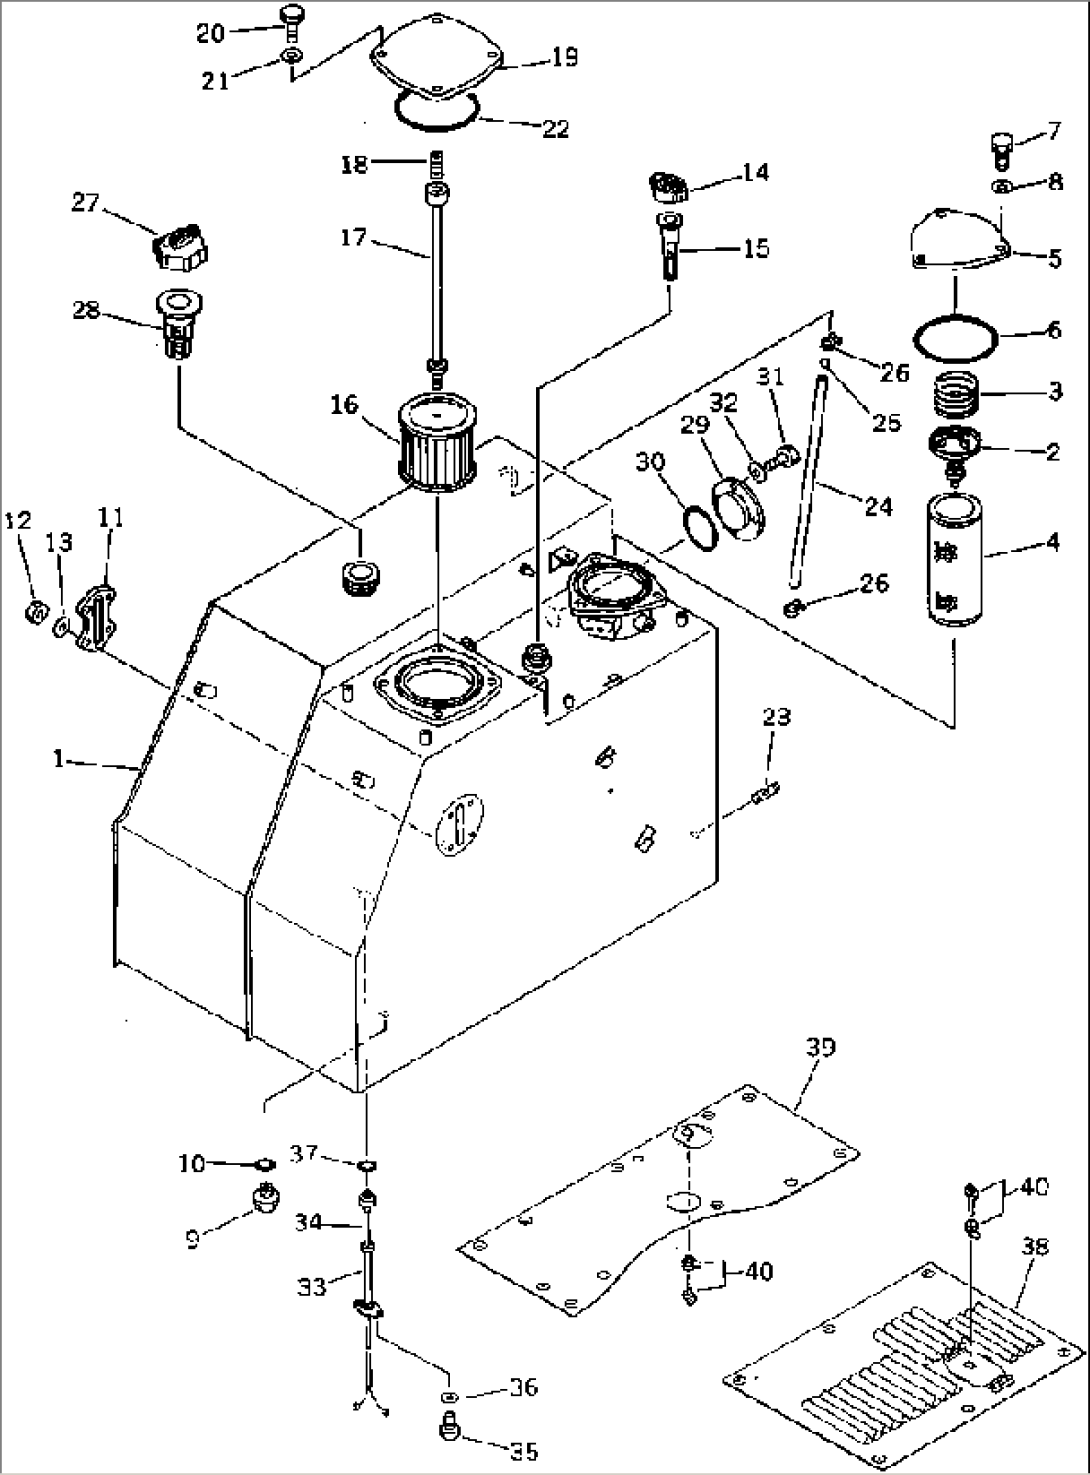 HYDRAULIC TANK (FOR VANDALISM PROTECTION)